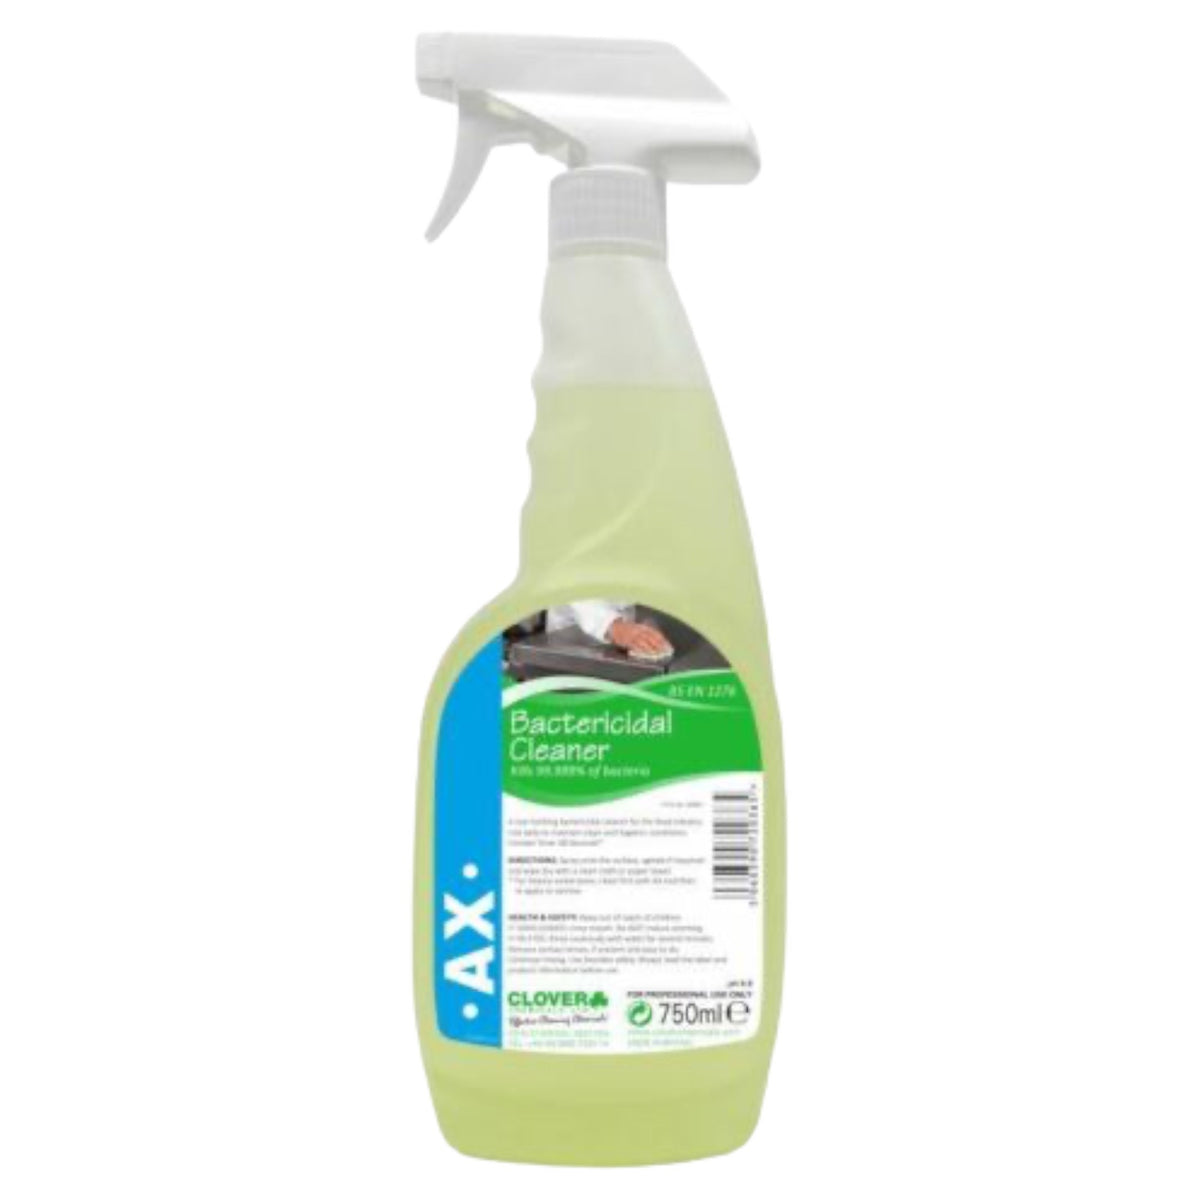 Clover Chemicals AX Bactericidal Cleaner 750ml